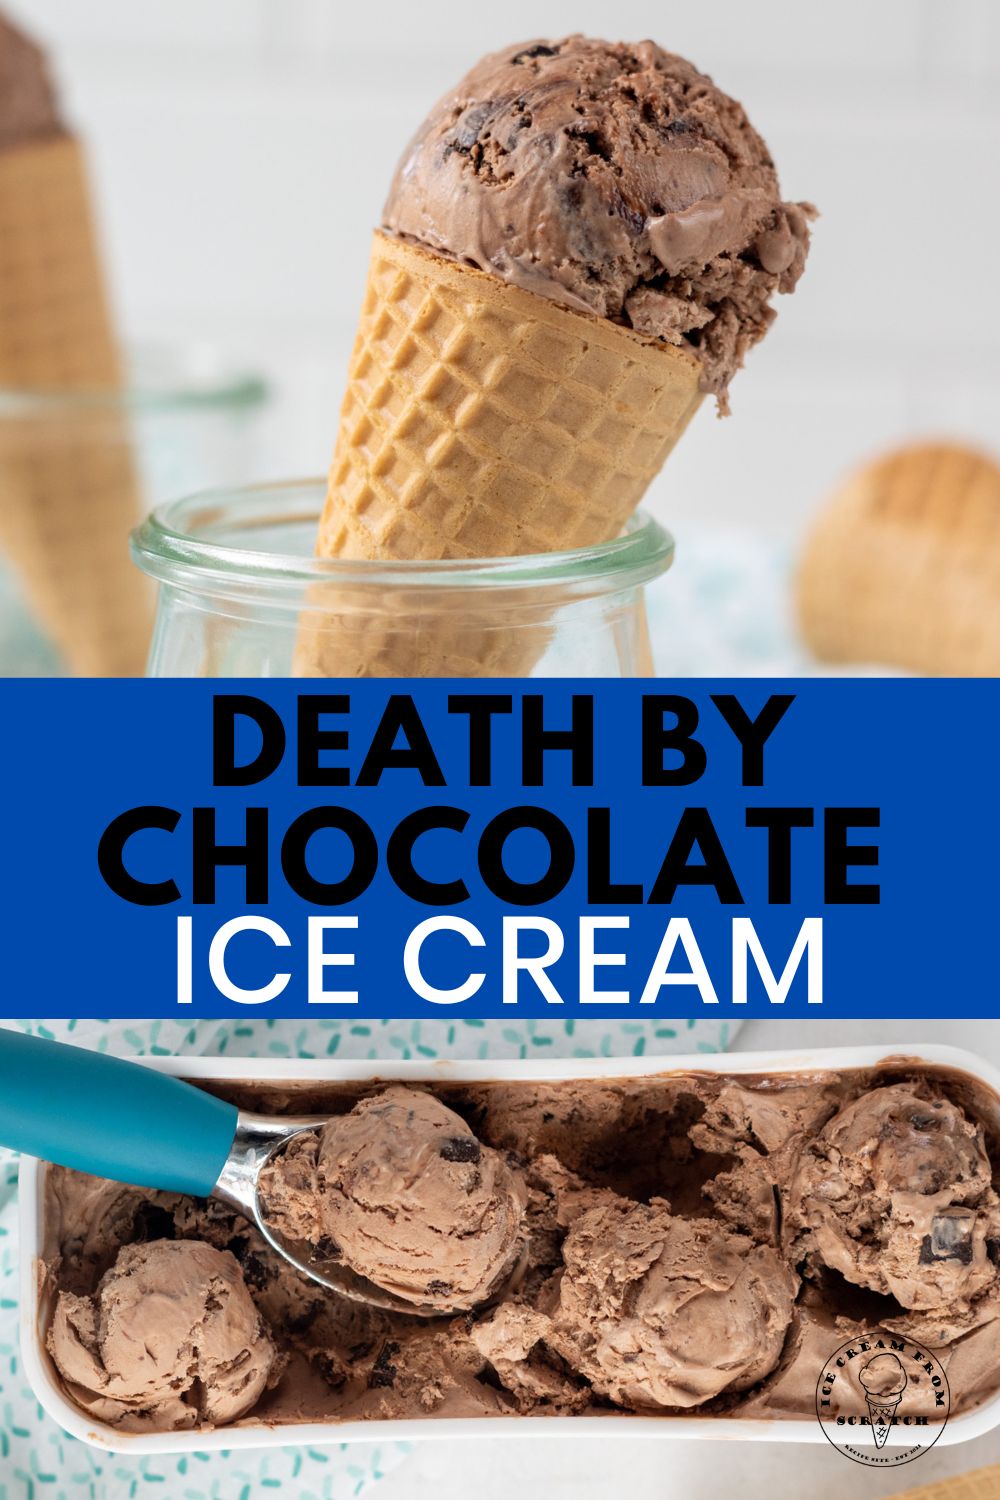 two images of double chocolate ice cream. Text overlay in center in a blue box says "death by chocolate ice cream"